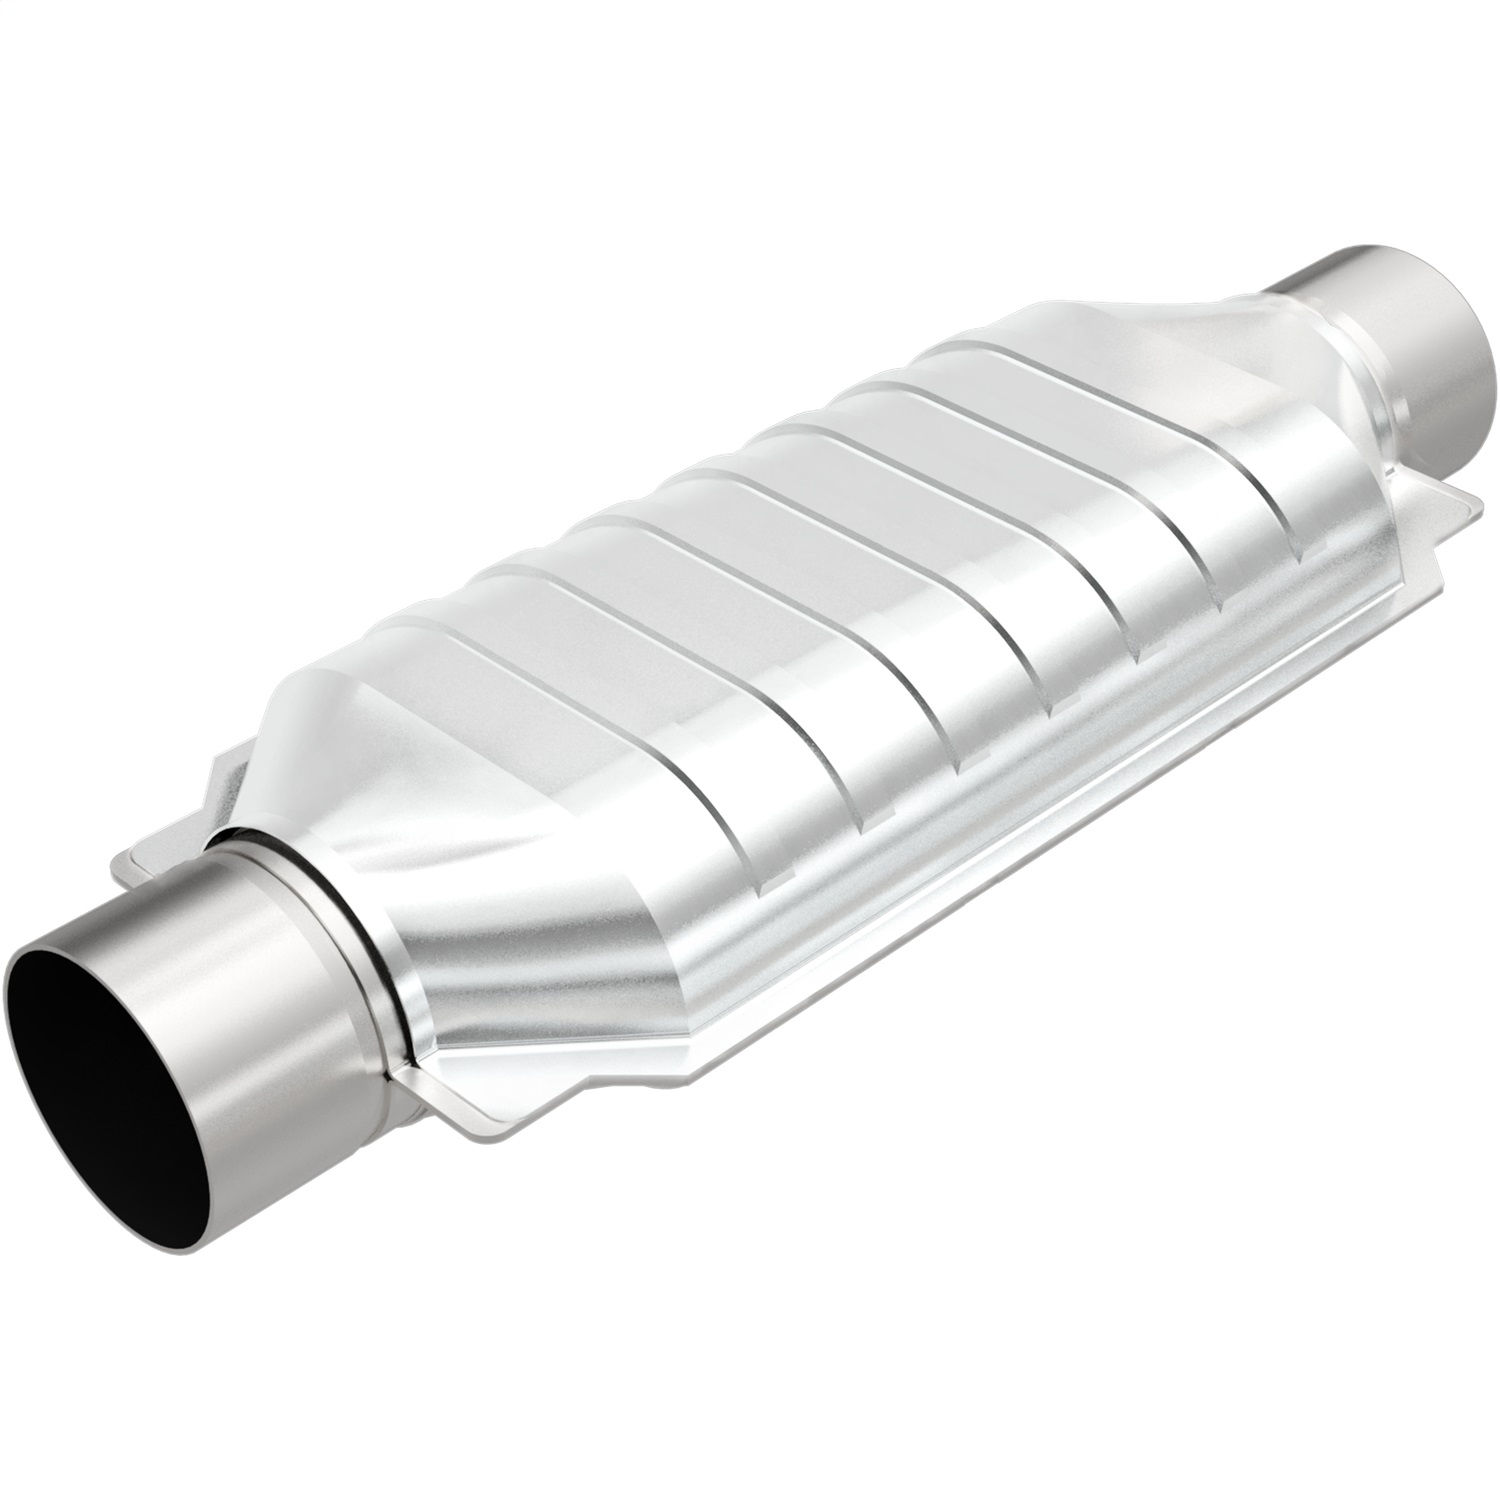 MagnaFlow Exhaust Products MagnaFlow 49 State Converter 99509HM Heavy Metal Series Catalytic Converter